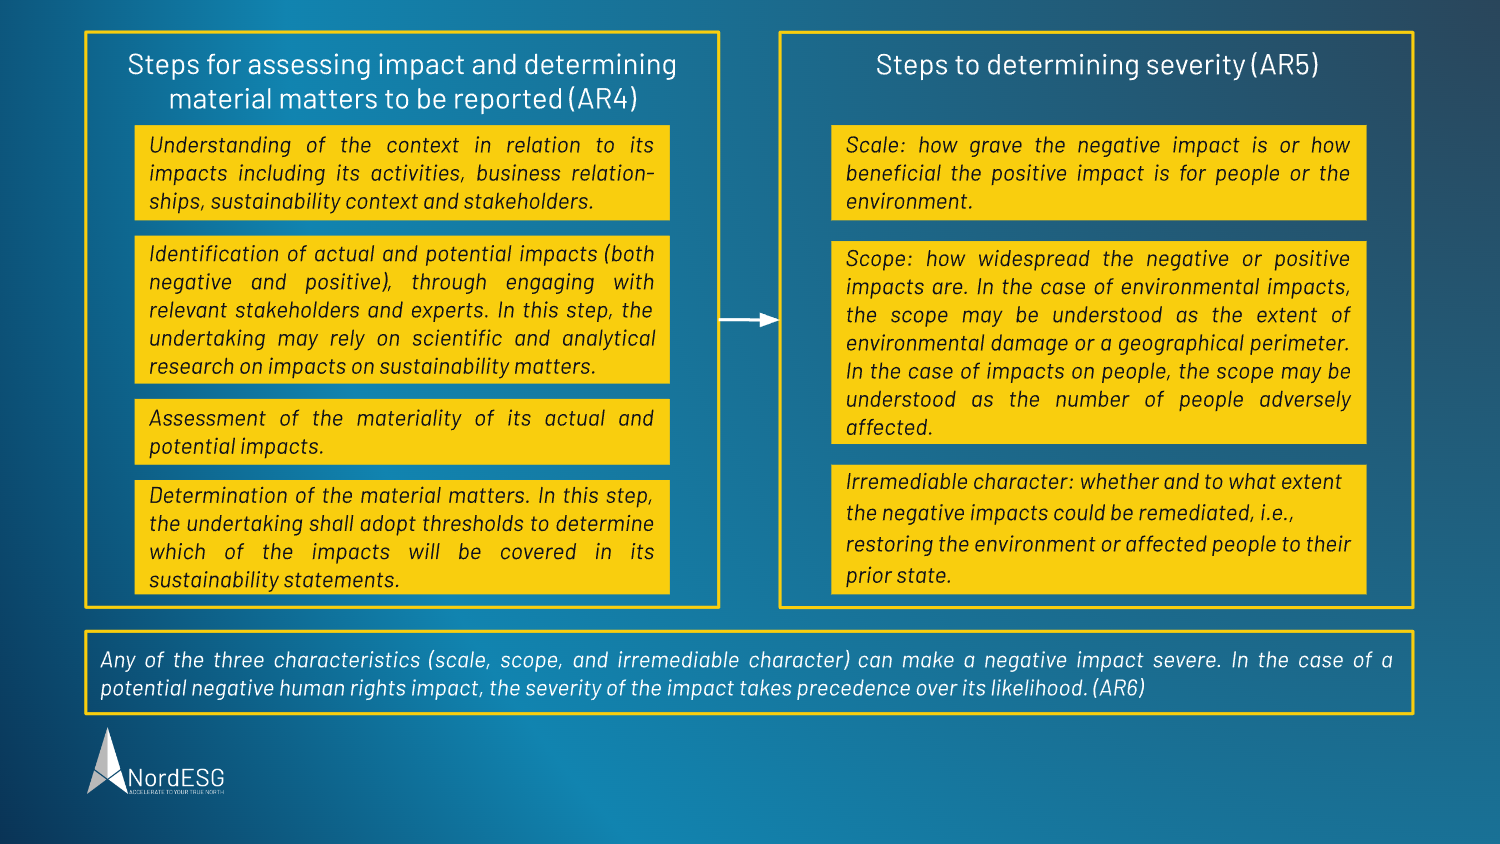 Assessing the impact and determining material matters to be reported and their severity 